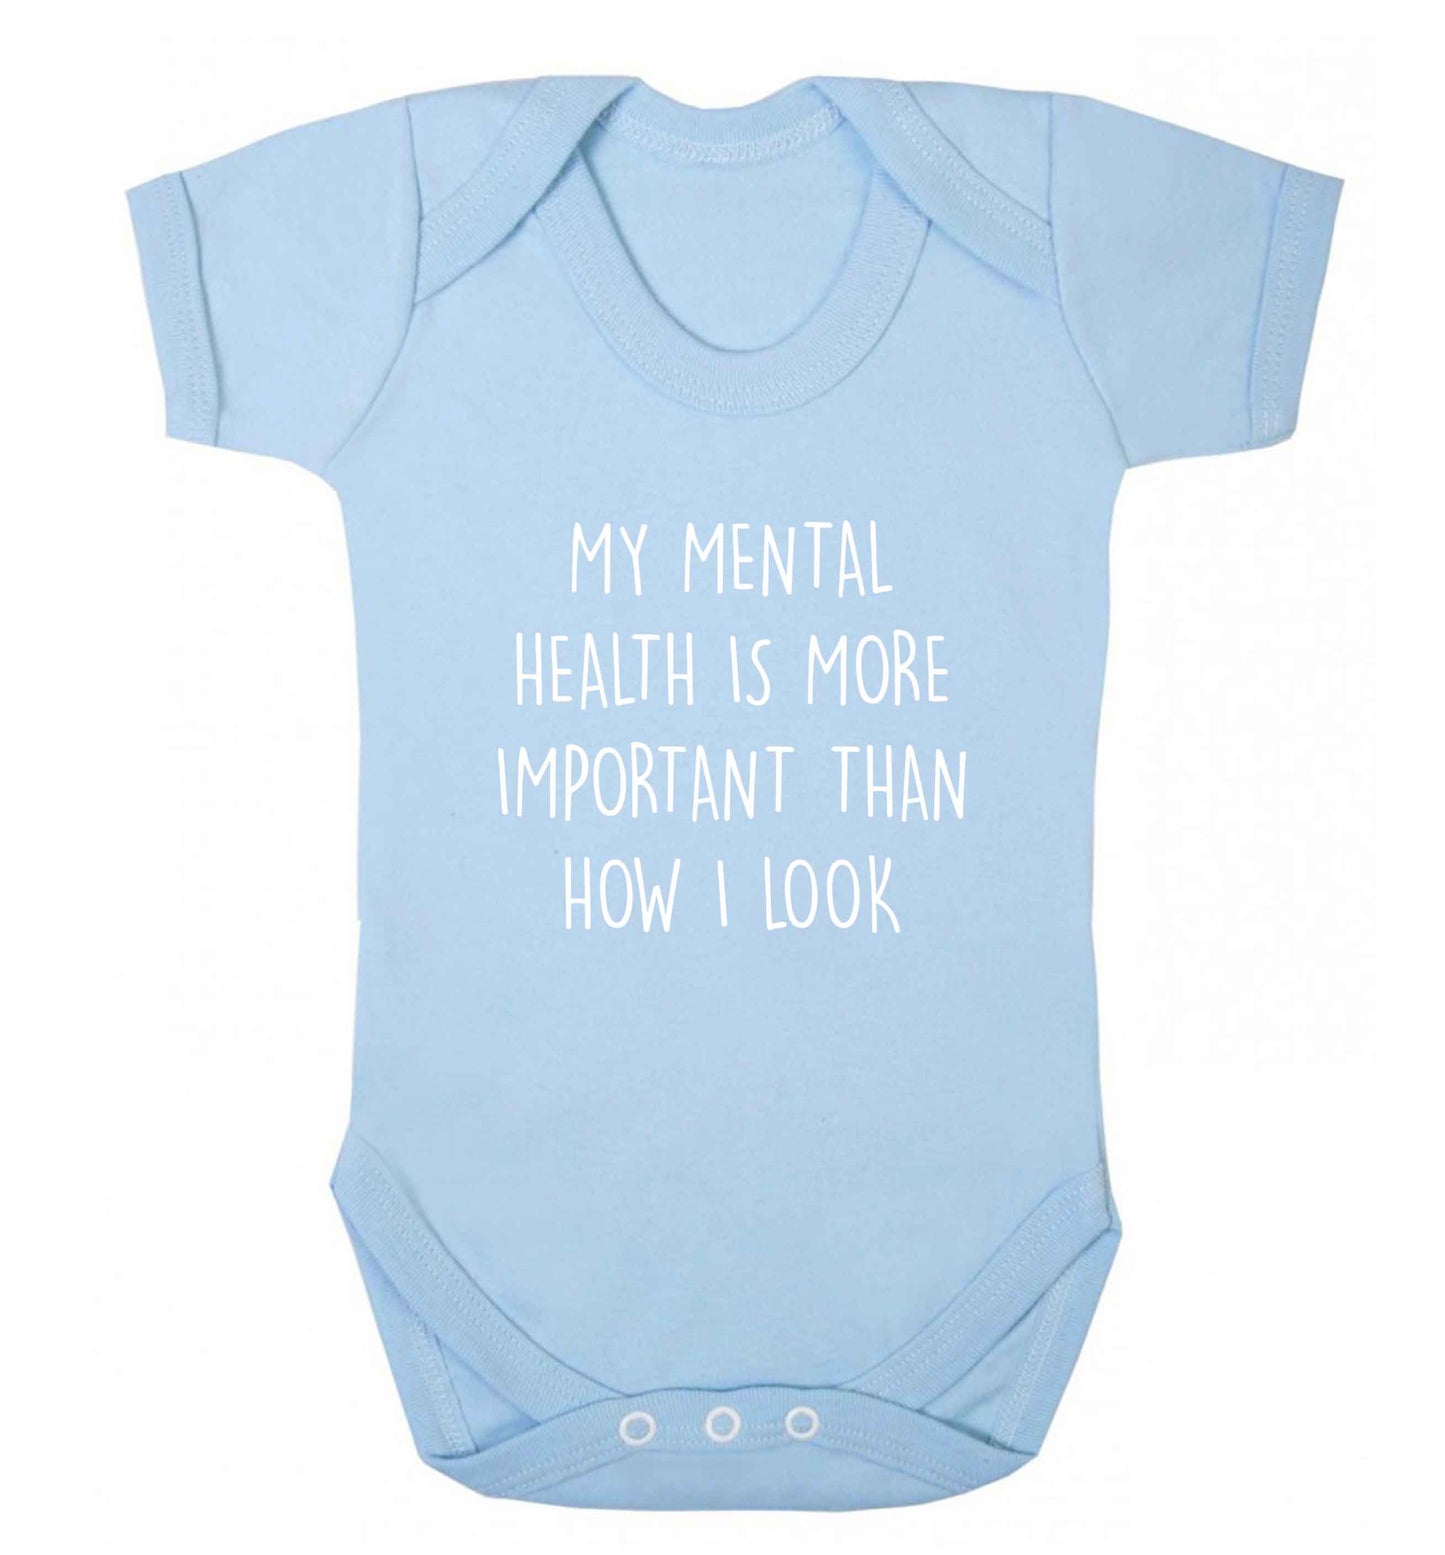 My mental health is more importnat than how I look baby vest pale blue 18-24 months